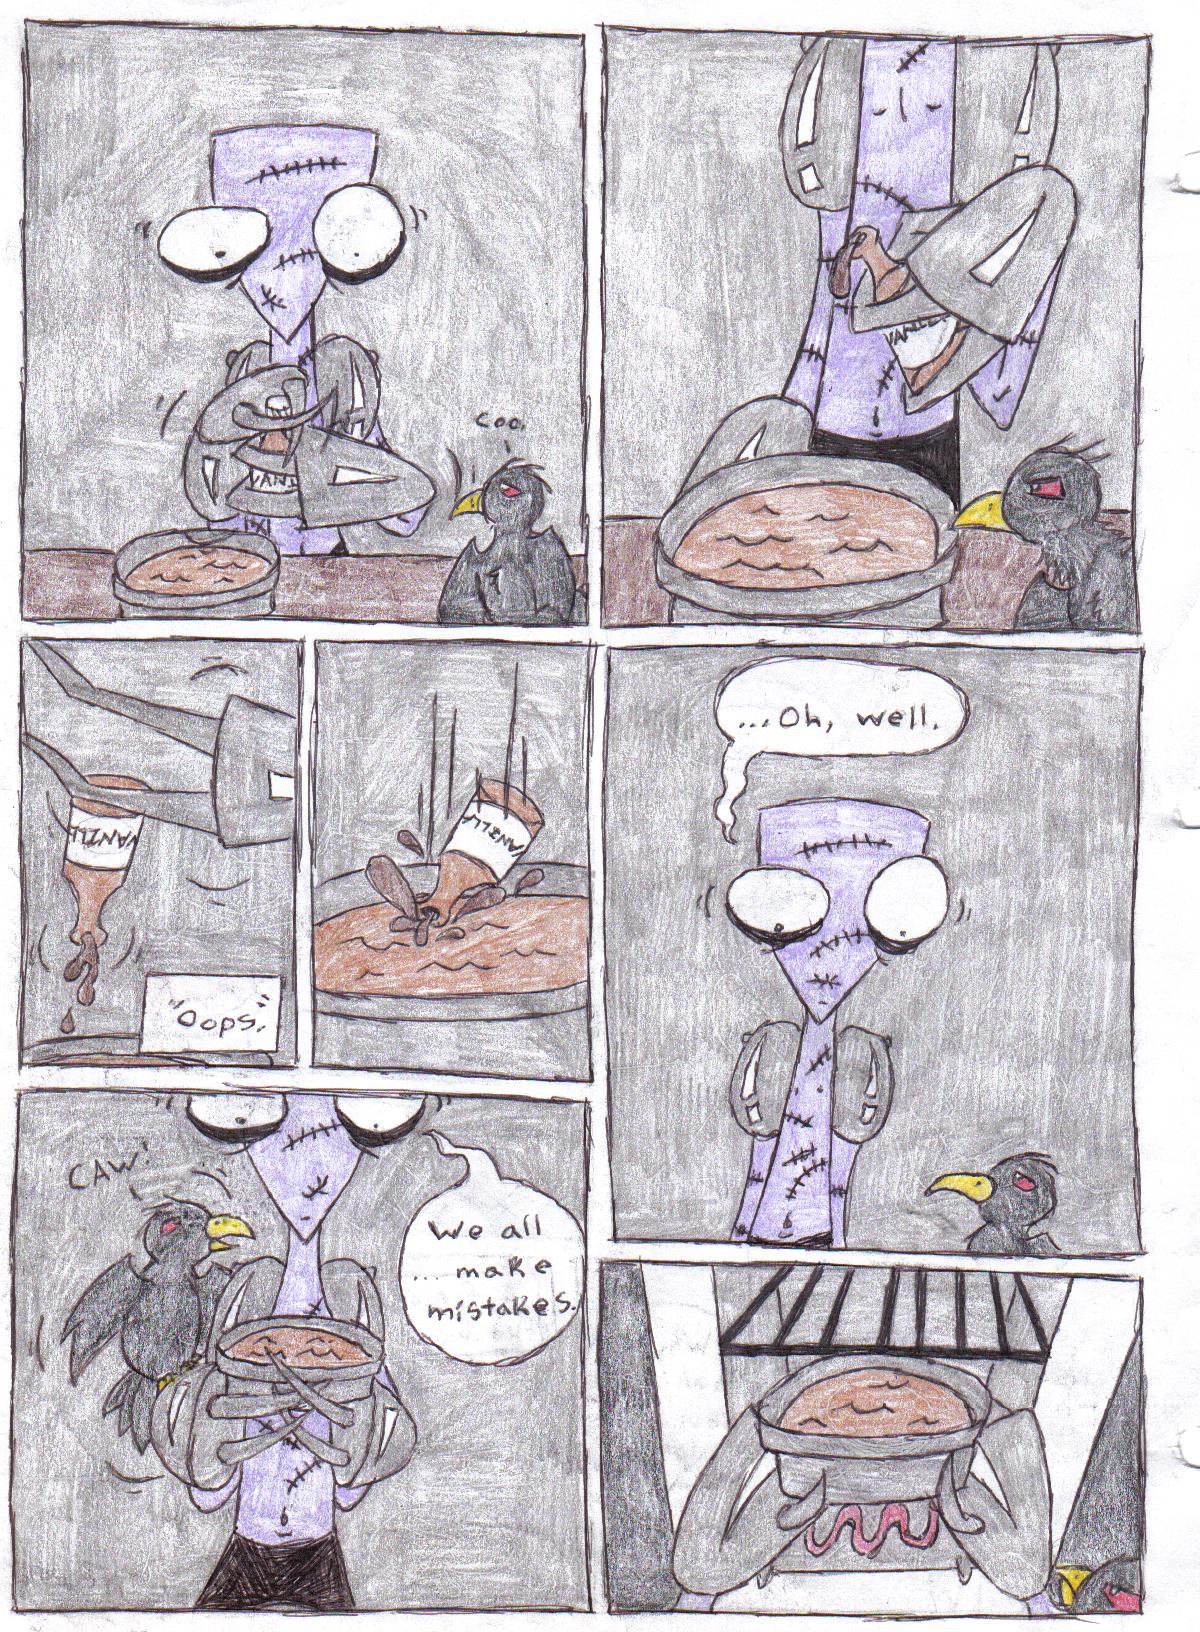 Icharus, The Torte (page two) by flammingcorn